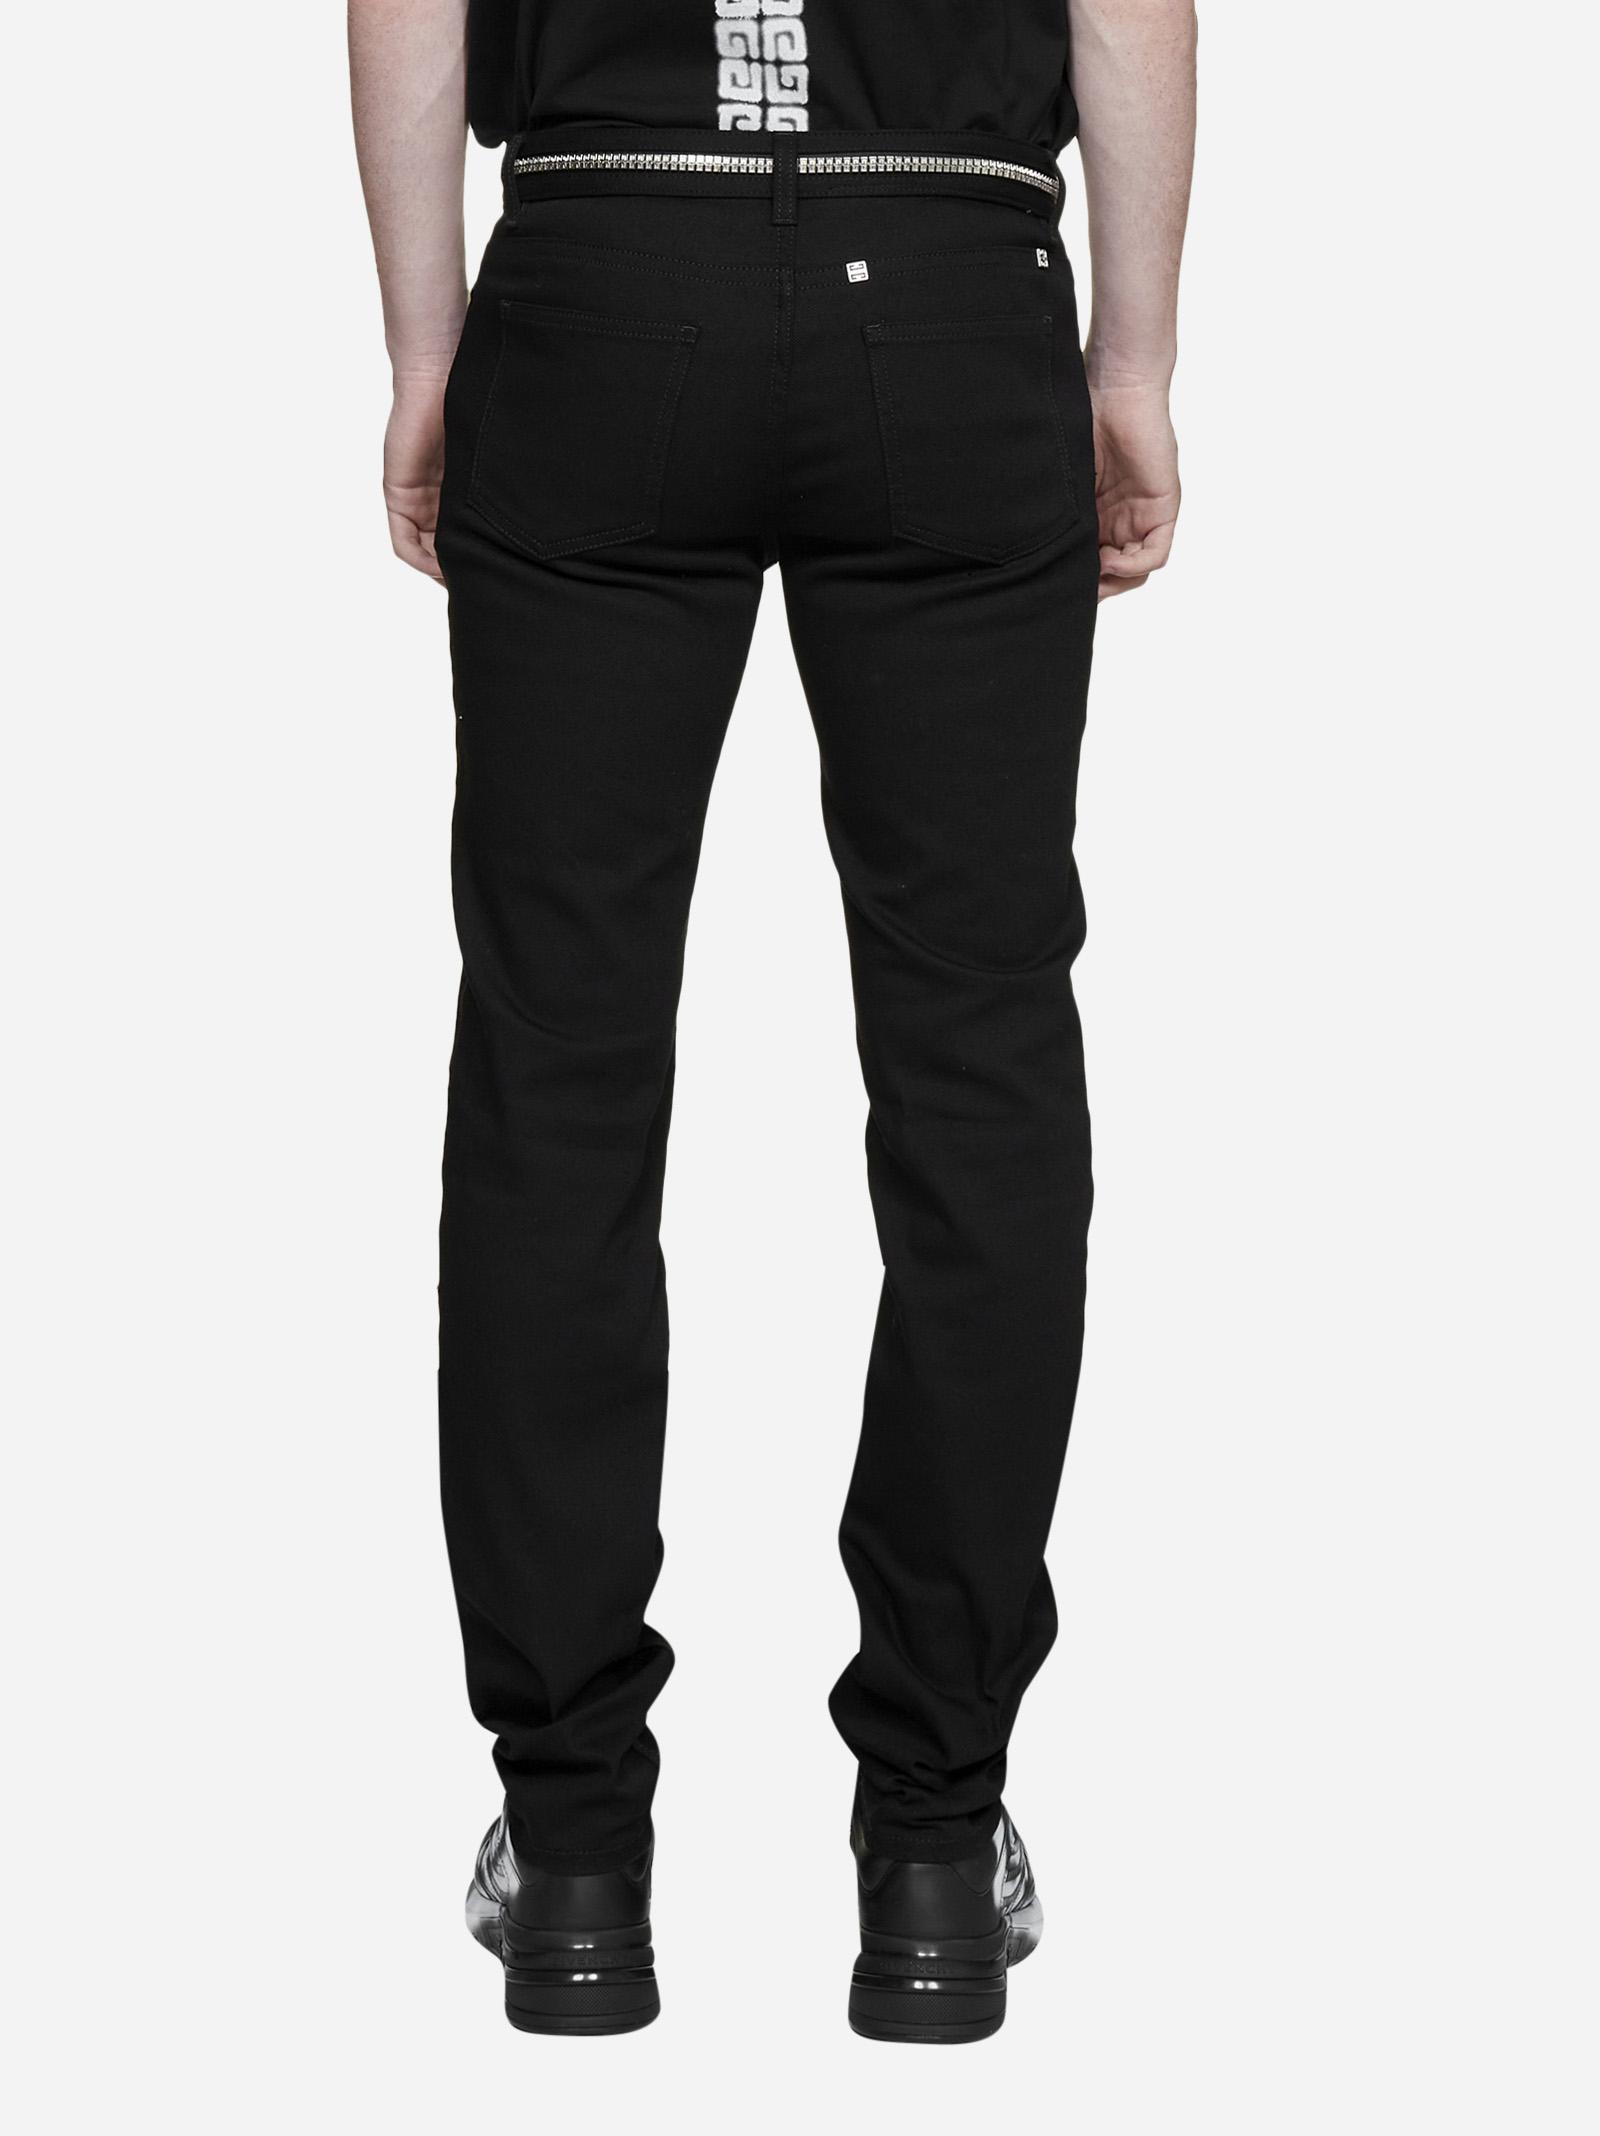 Givenchy 4g Logo Studded Skinny Jeans in Black | Lyst